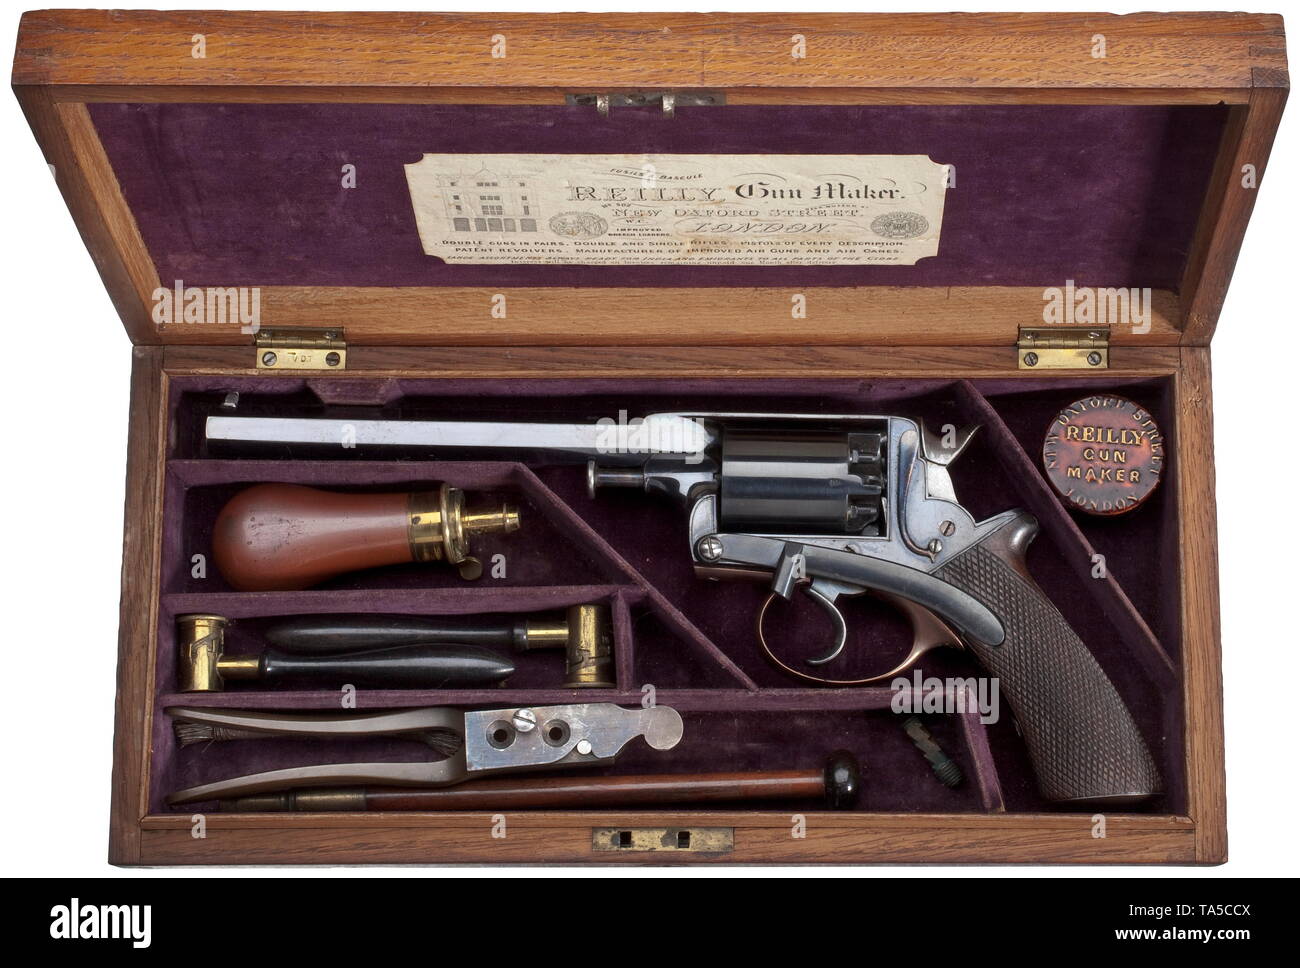 A Reilly percussion revolver, Beaumont Adams system, circa 1860 12.2 mm calibre, no. 16.349.R. Octagonal 7 1/4' barrel, bright bore, acceptance marks on top left. On topstrap marked 'Reilly, 315 & 502 Oxford Stt. London.' Five-shot cylinder, also with acceptance marks. On right side of topstrap number and patent data as well as colour case hardened sliding safety, press on the left. Barrel and frame with deep black, original finish. Hammer lightly damaged on the right. Cylinder re-blued. Trigger frame and grip cap with modern, reddish finish. One, Additional-Rights-Clearance-Info-Not-Available Stock Photo